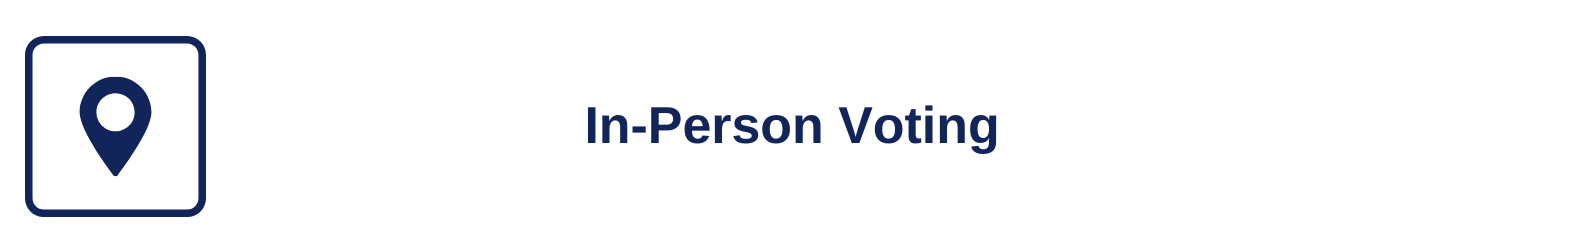 In-Person Voting